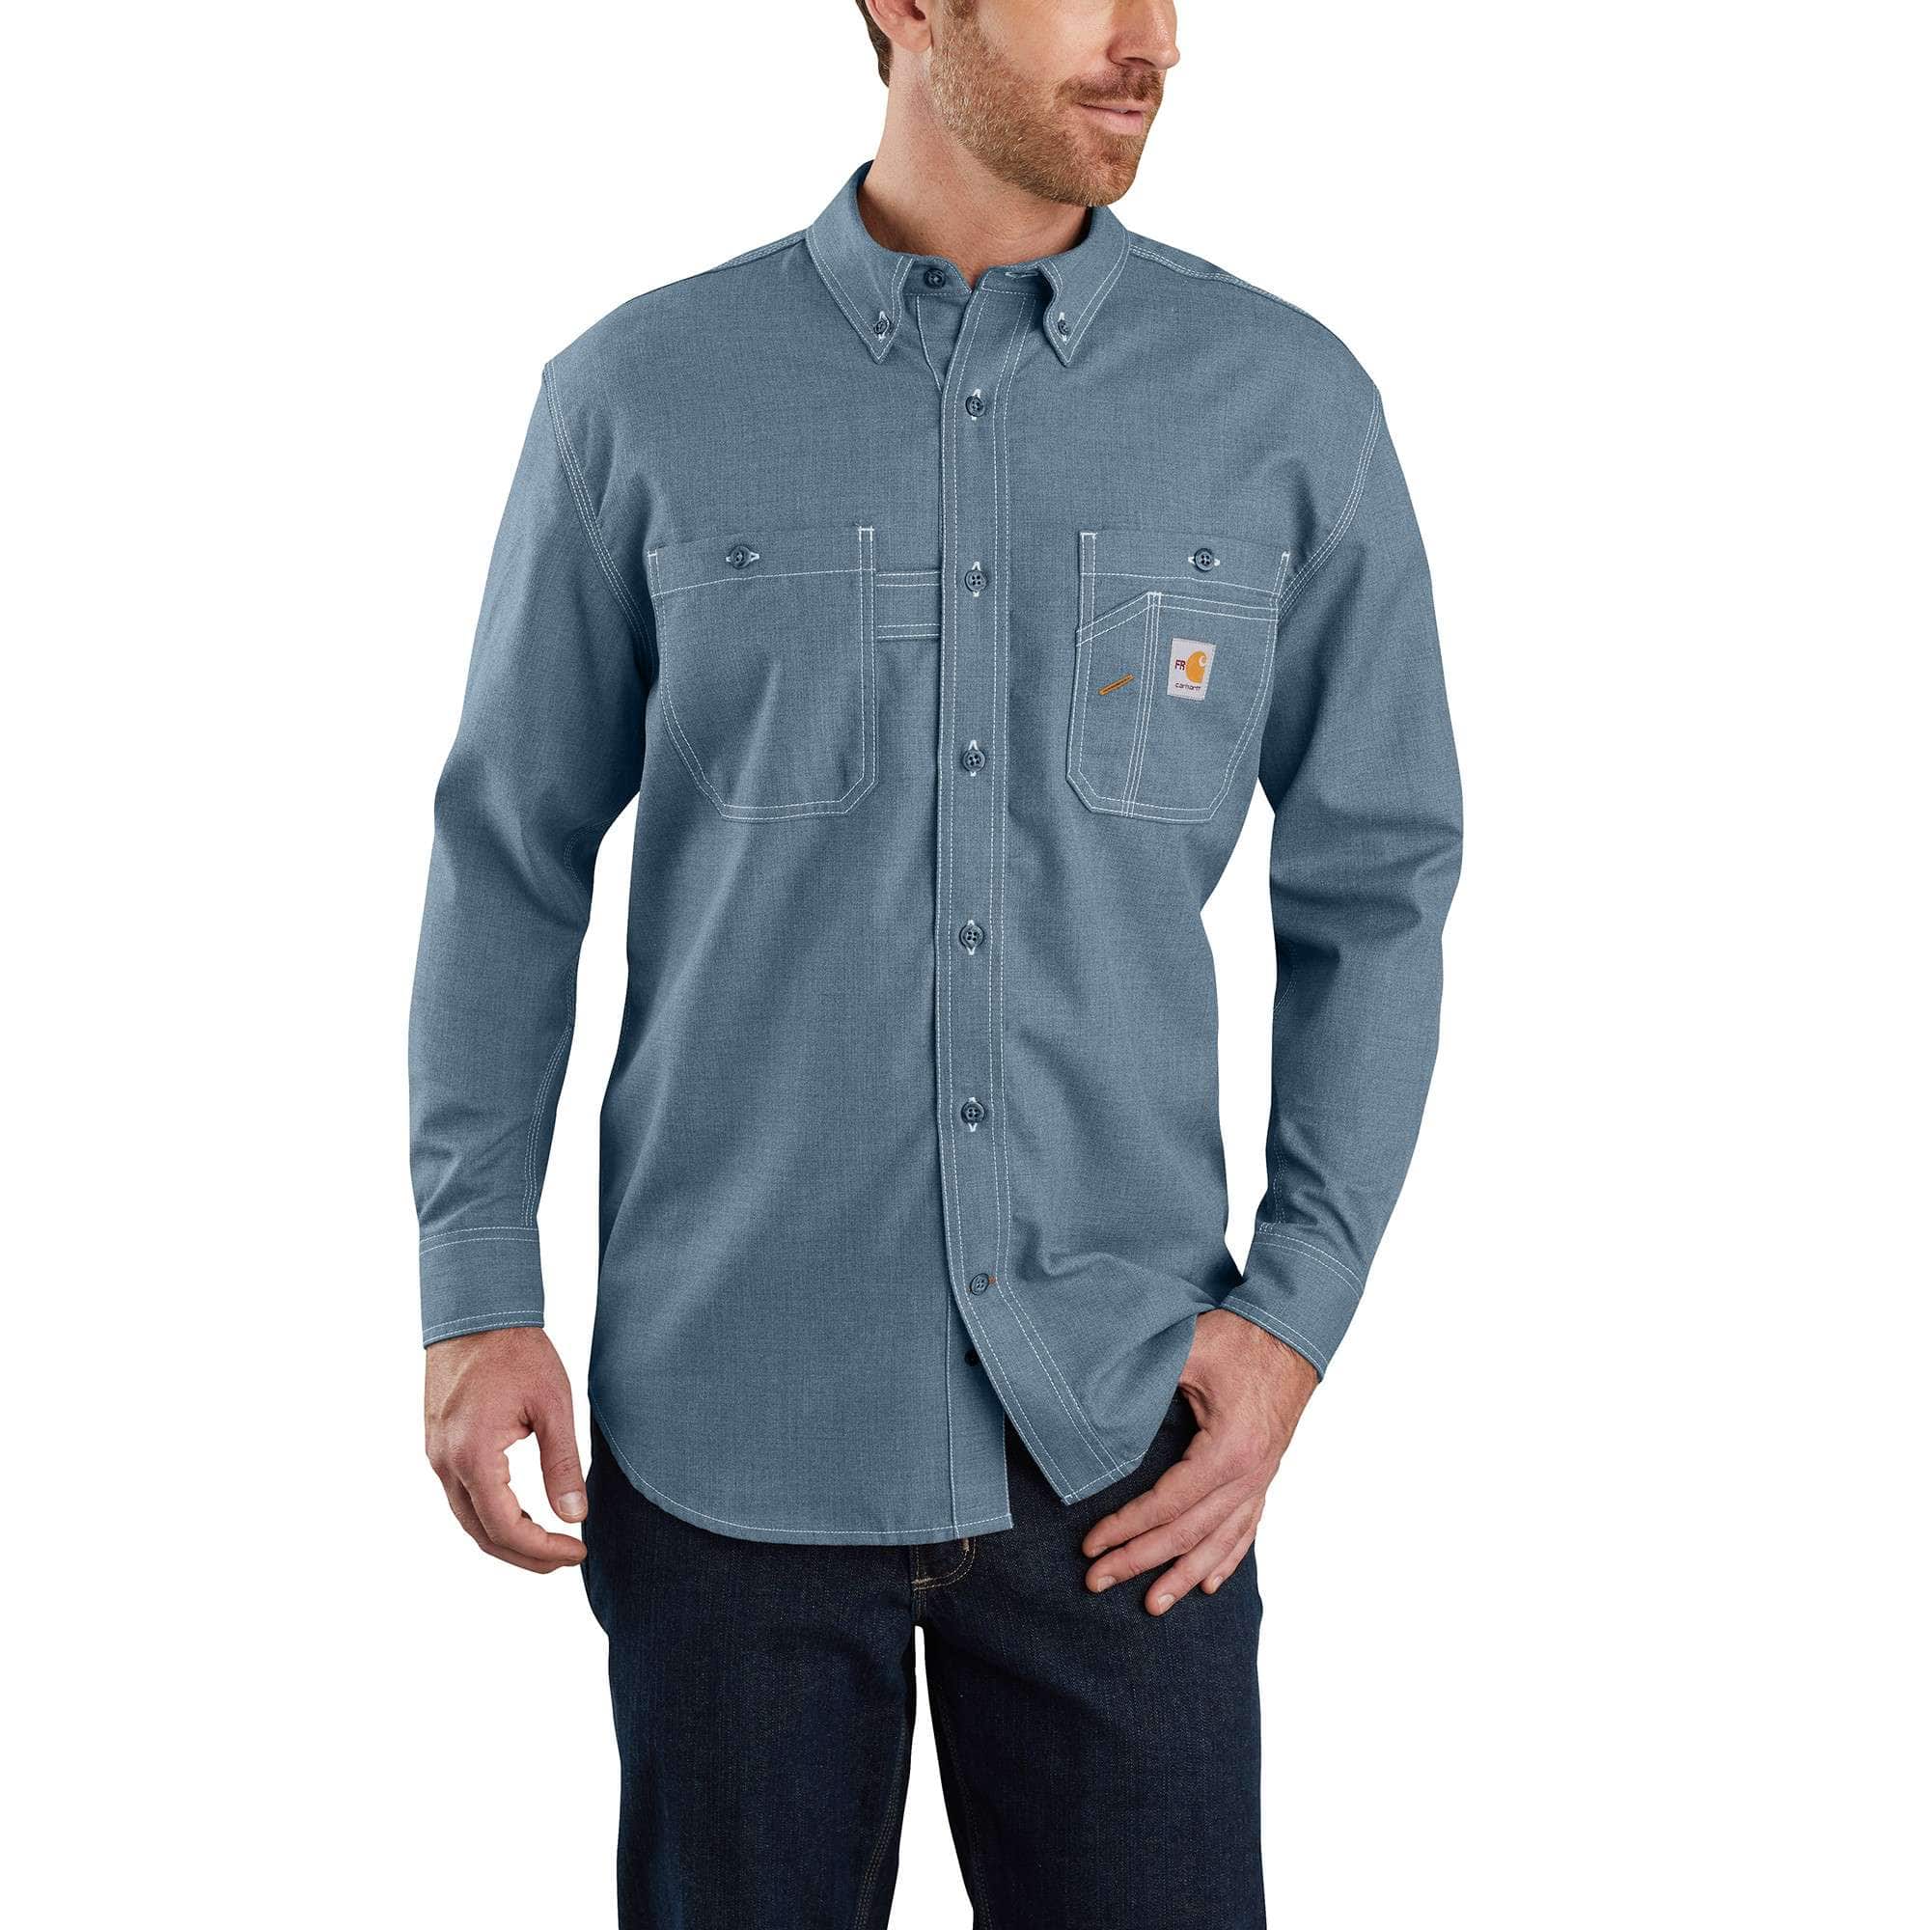 Flame Resistant (FR) Clothing for Work, Carhartt